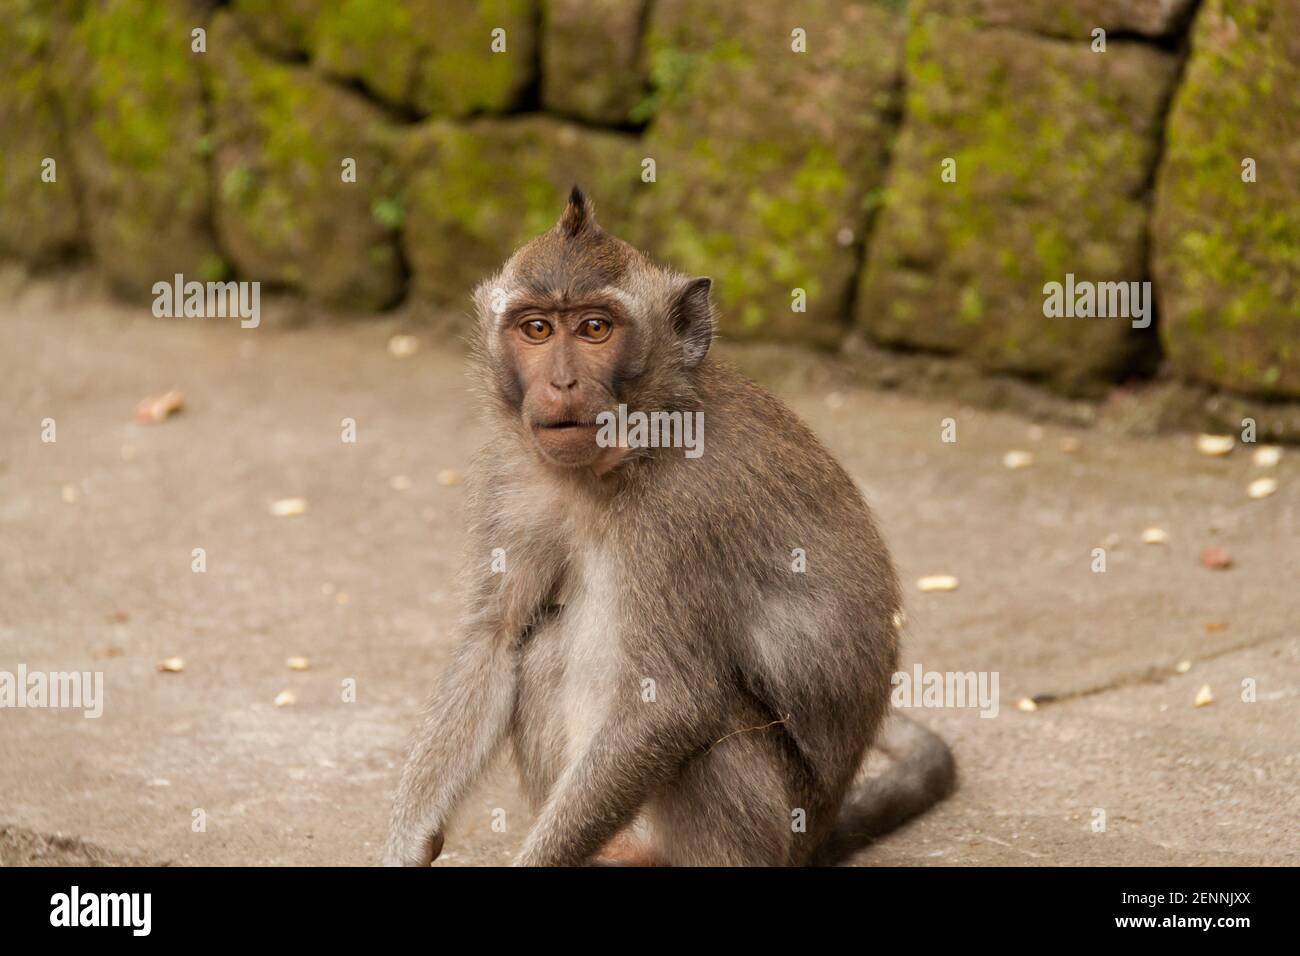 A young long-tailed macaque (macaca fascicularis) with big eyes looking at the camera Stock Photo